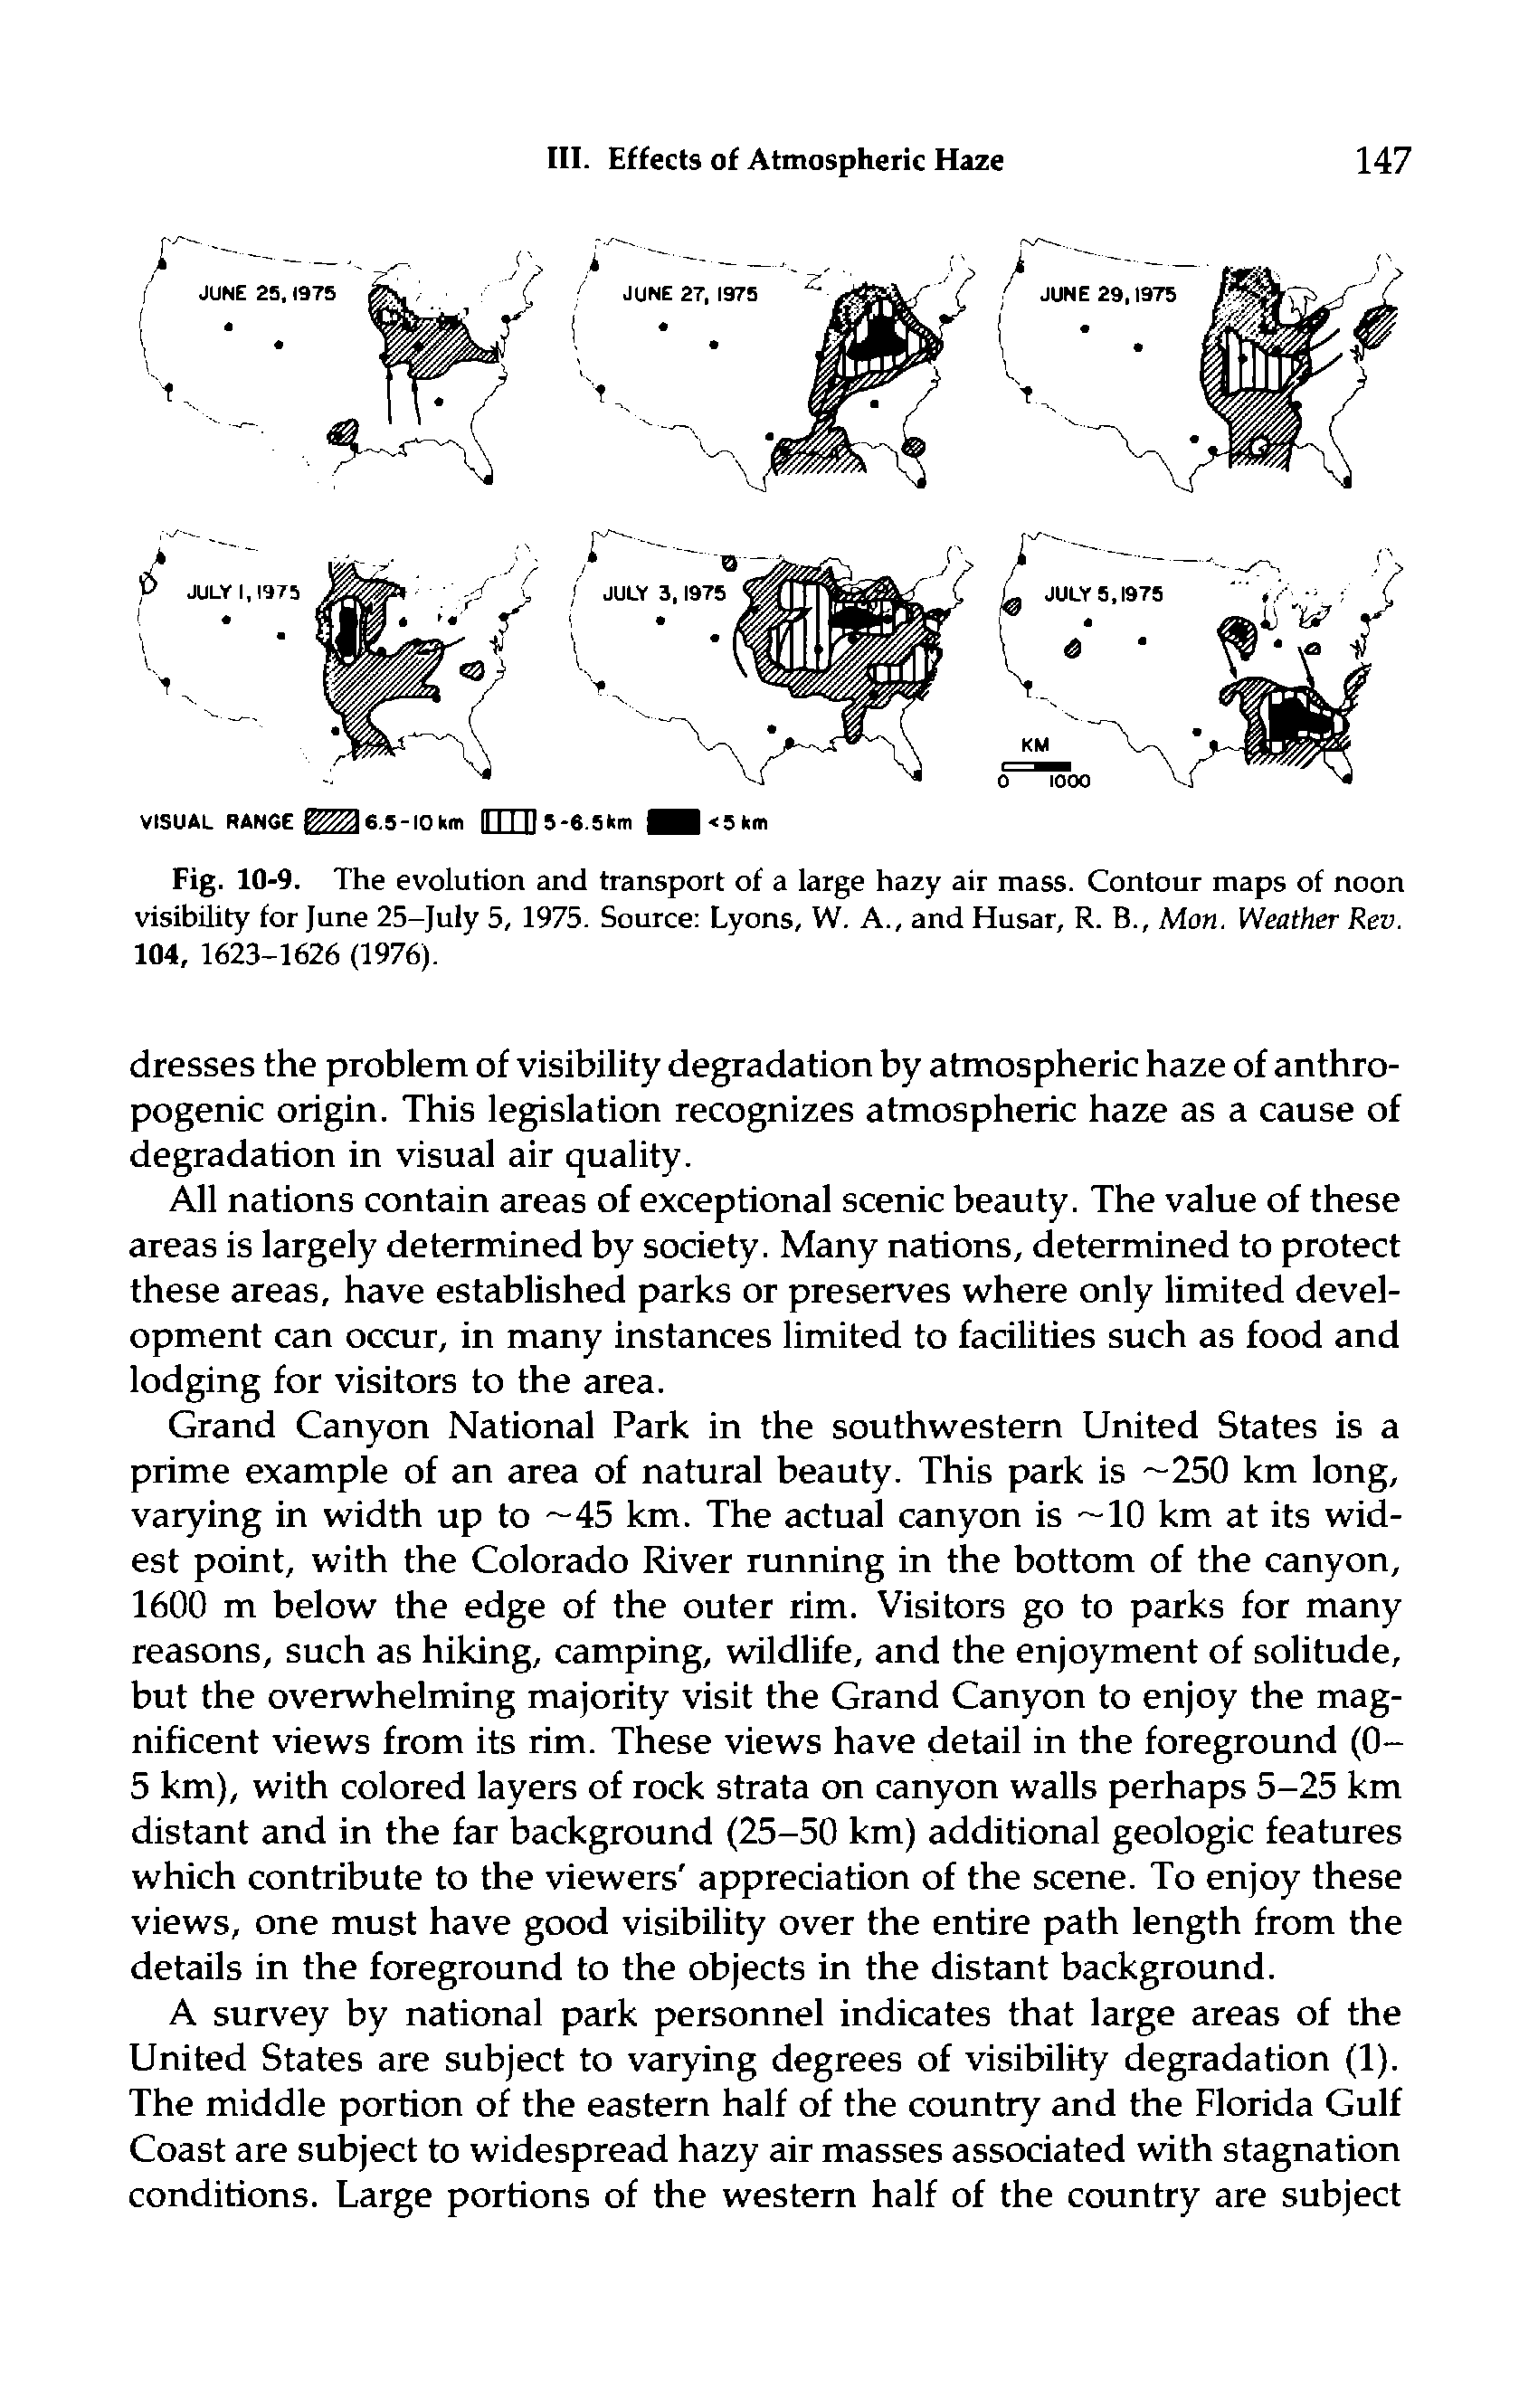 Fig. 10-9. The evolution and transport of a large hazy air mass. Contour maps of noon visibility for June 25-July 5, 1975. Source Lyons, W. A., and Husar, R. B., Mon. Weather Rev. 104, 1623-1626 (1976).